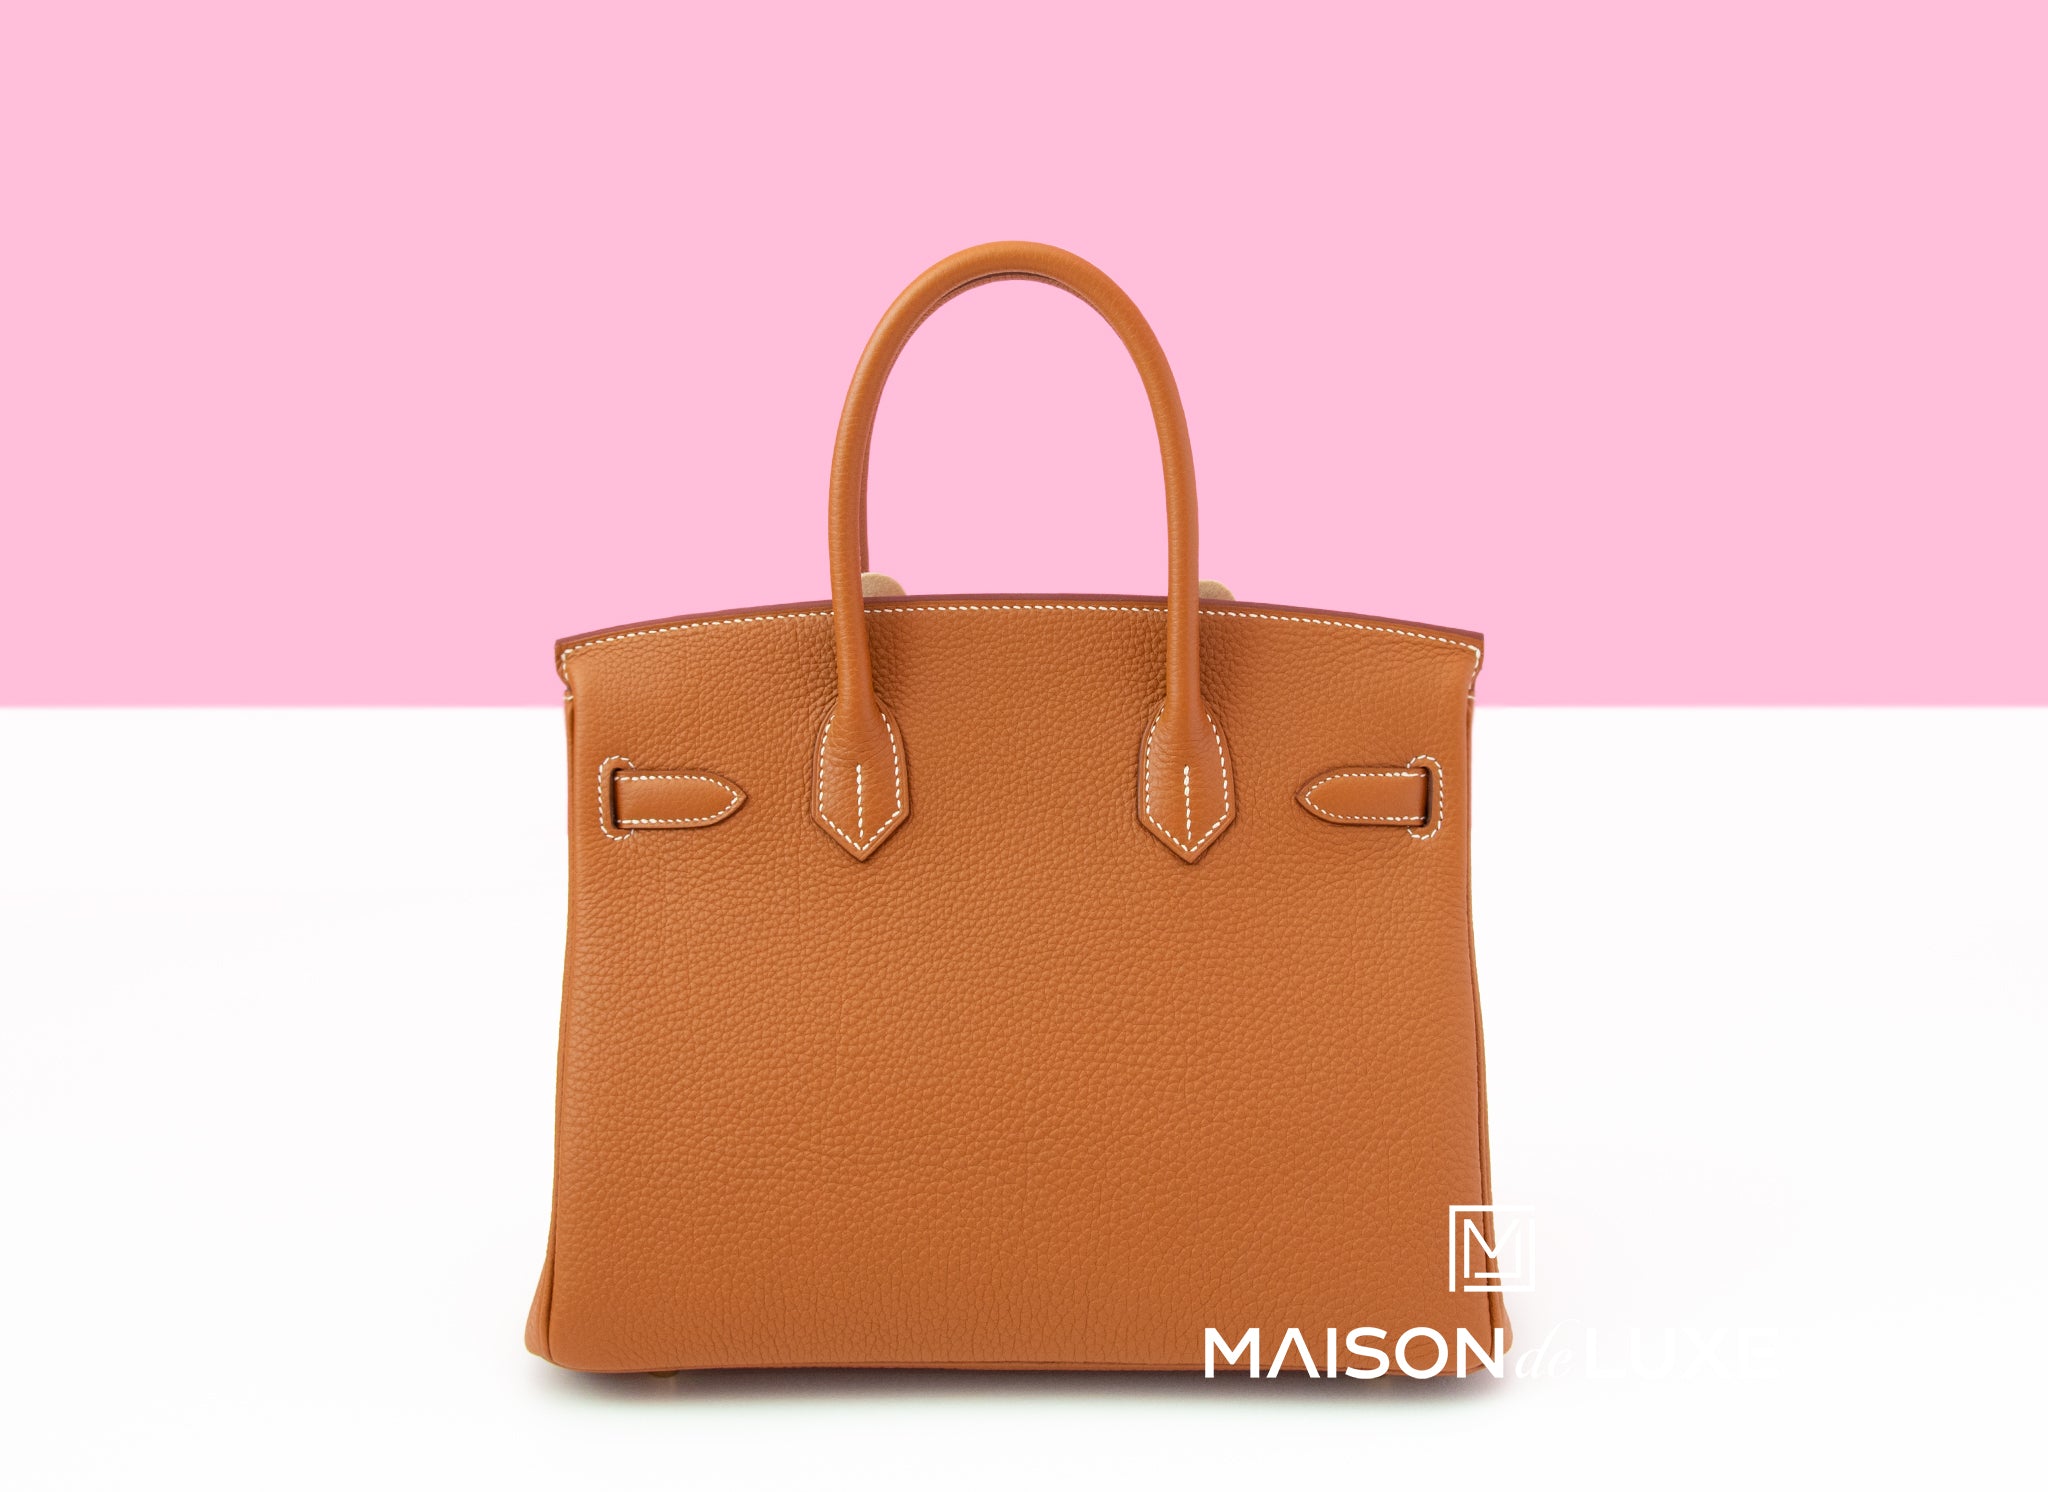 All about the Hermès Birkin bag collection